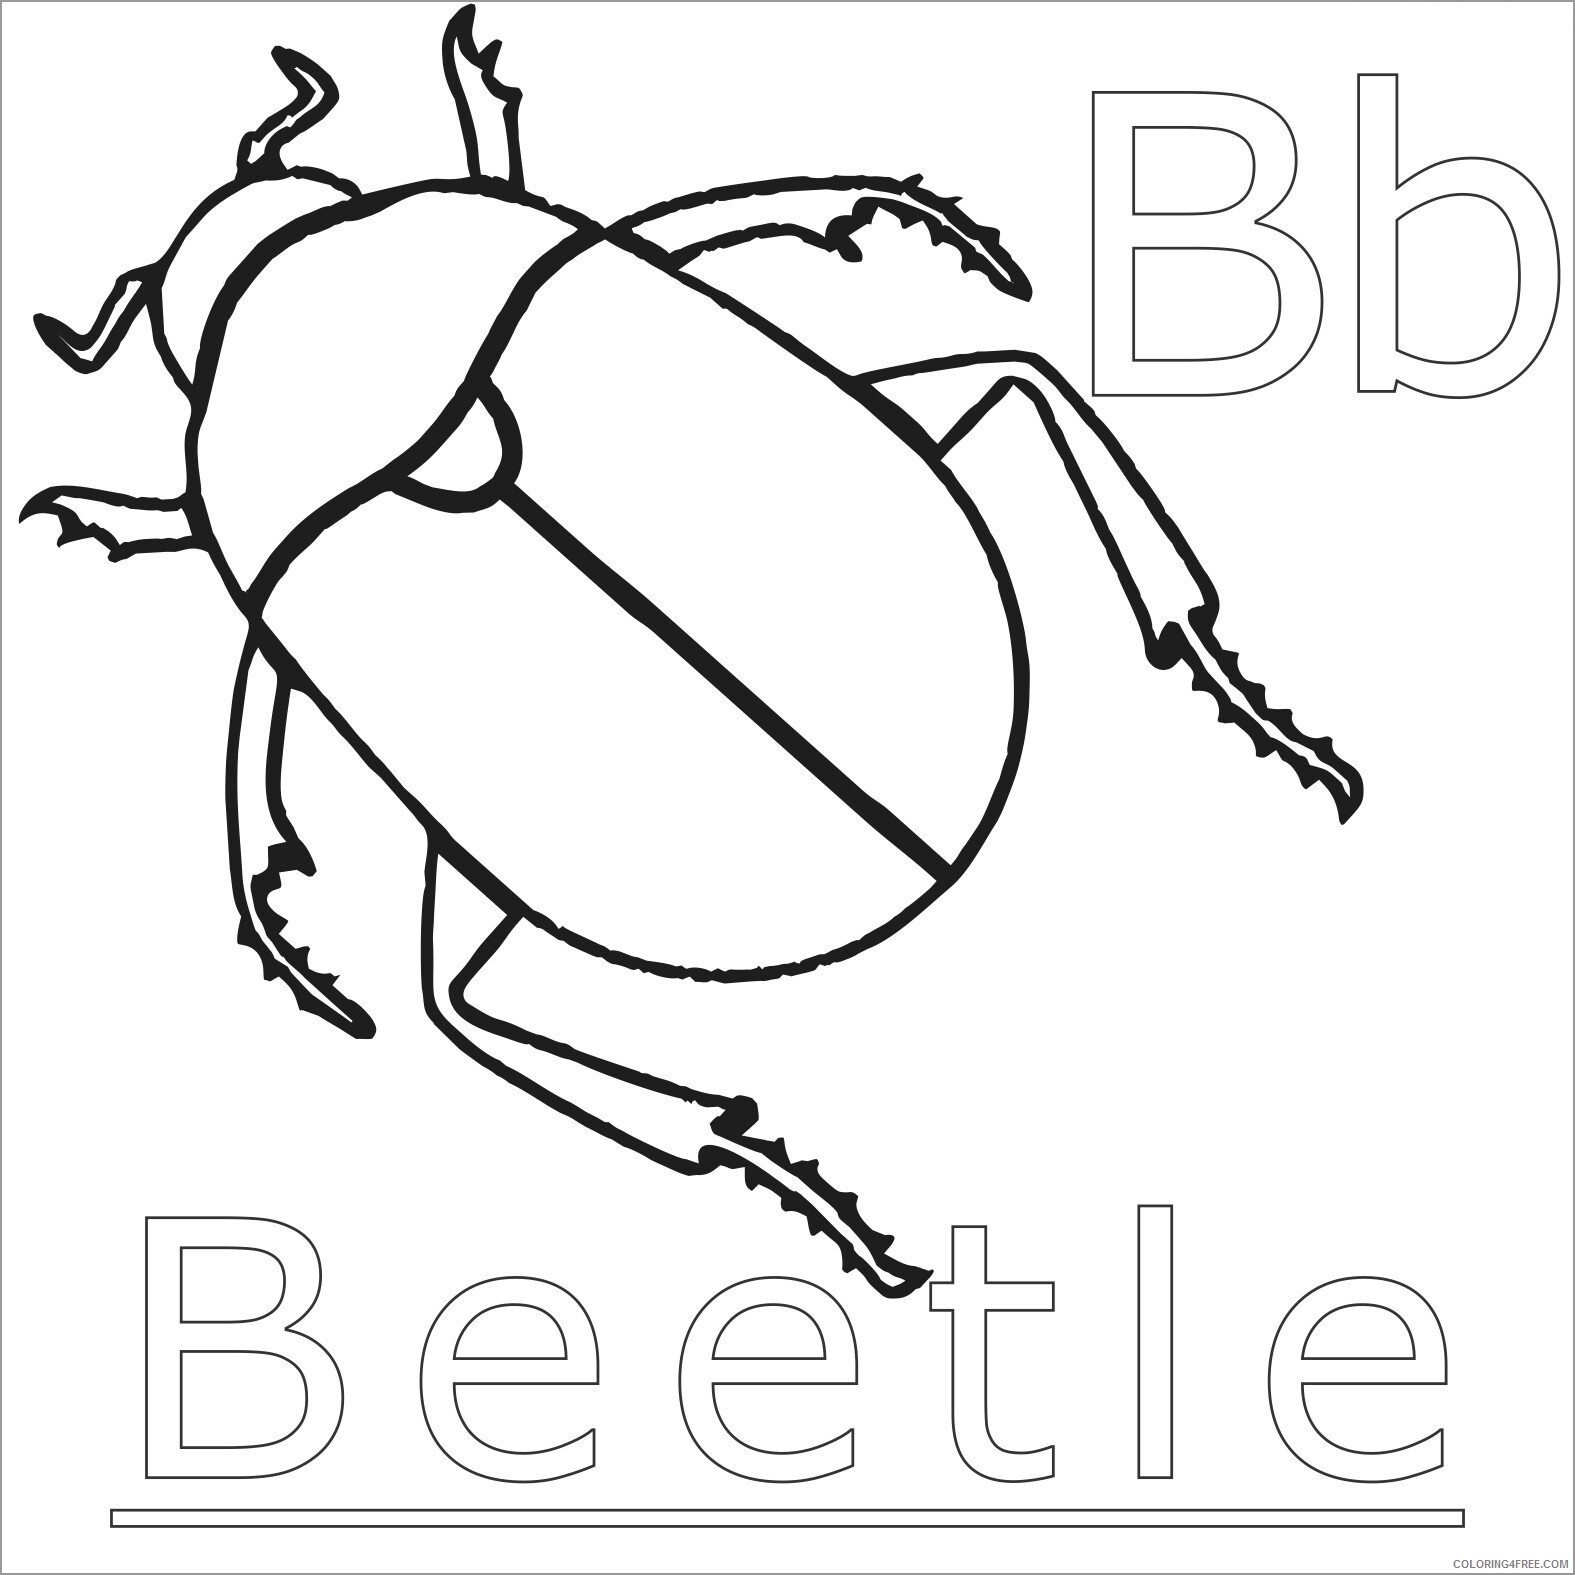 Beetles Coloring Pages Animal Printable Sheets b for beetle 2021 0429 Coloring4free